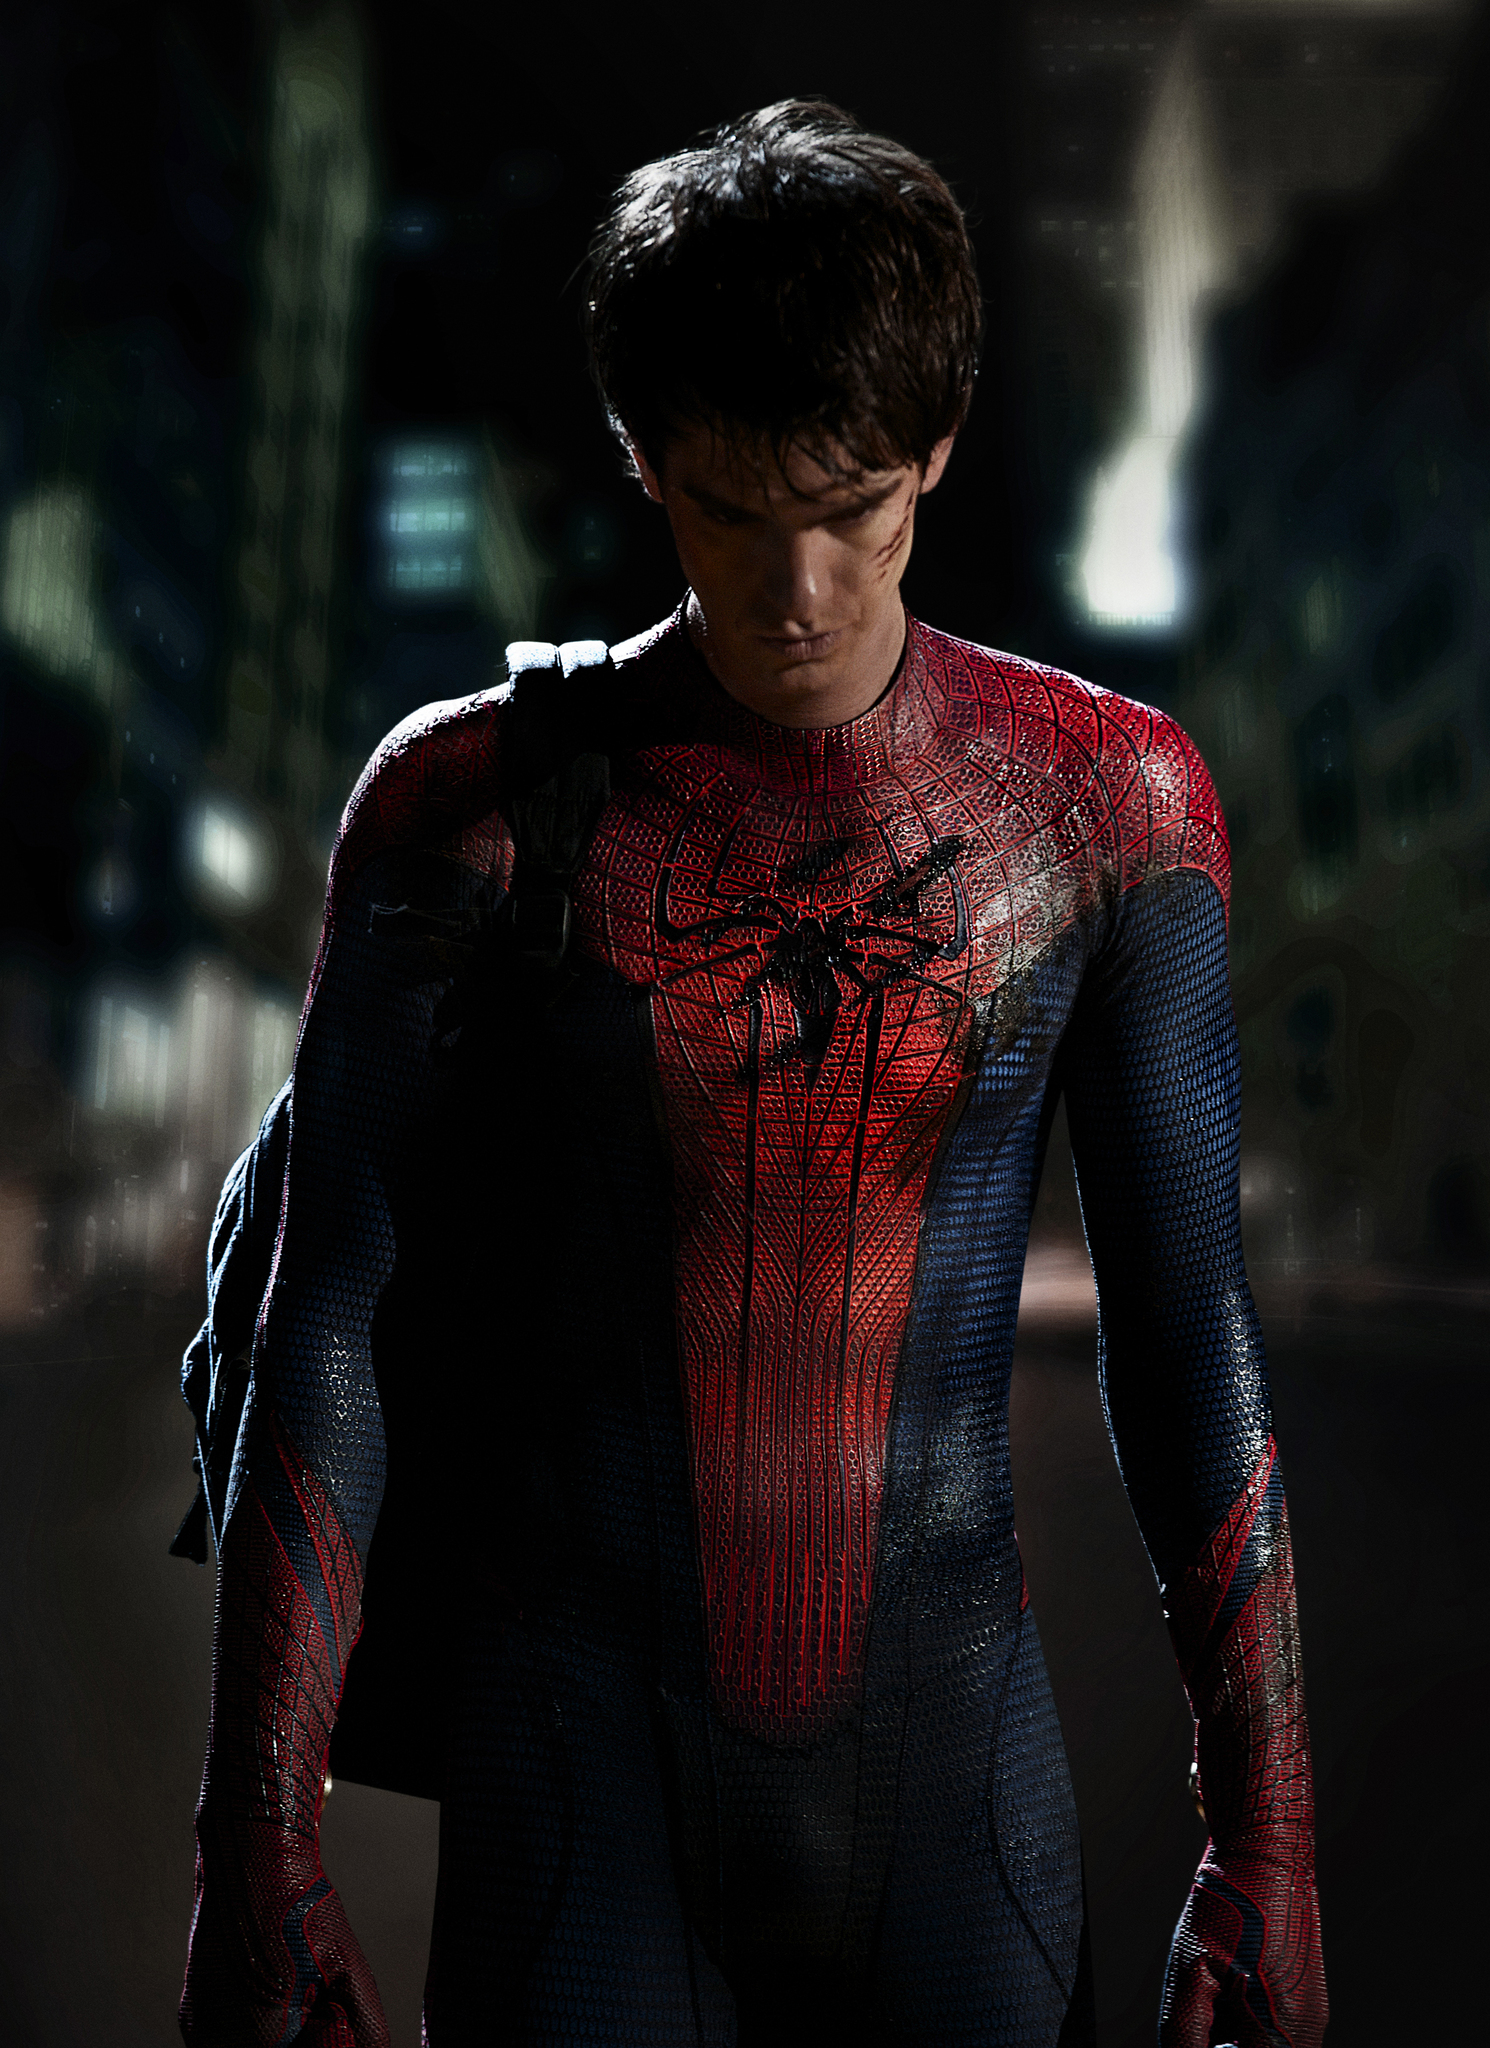 Columbia Pictures releases the first image of Andrew Garfield as Spider-Man